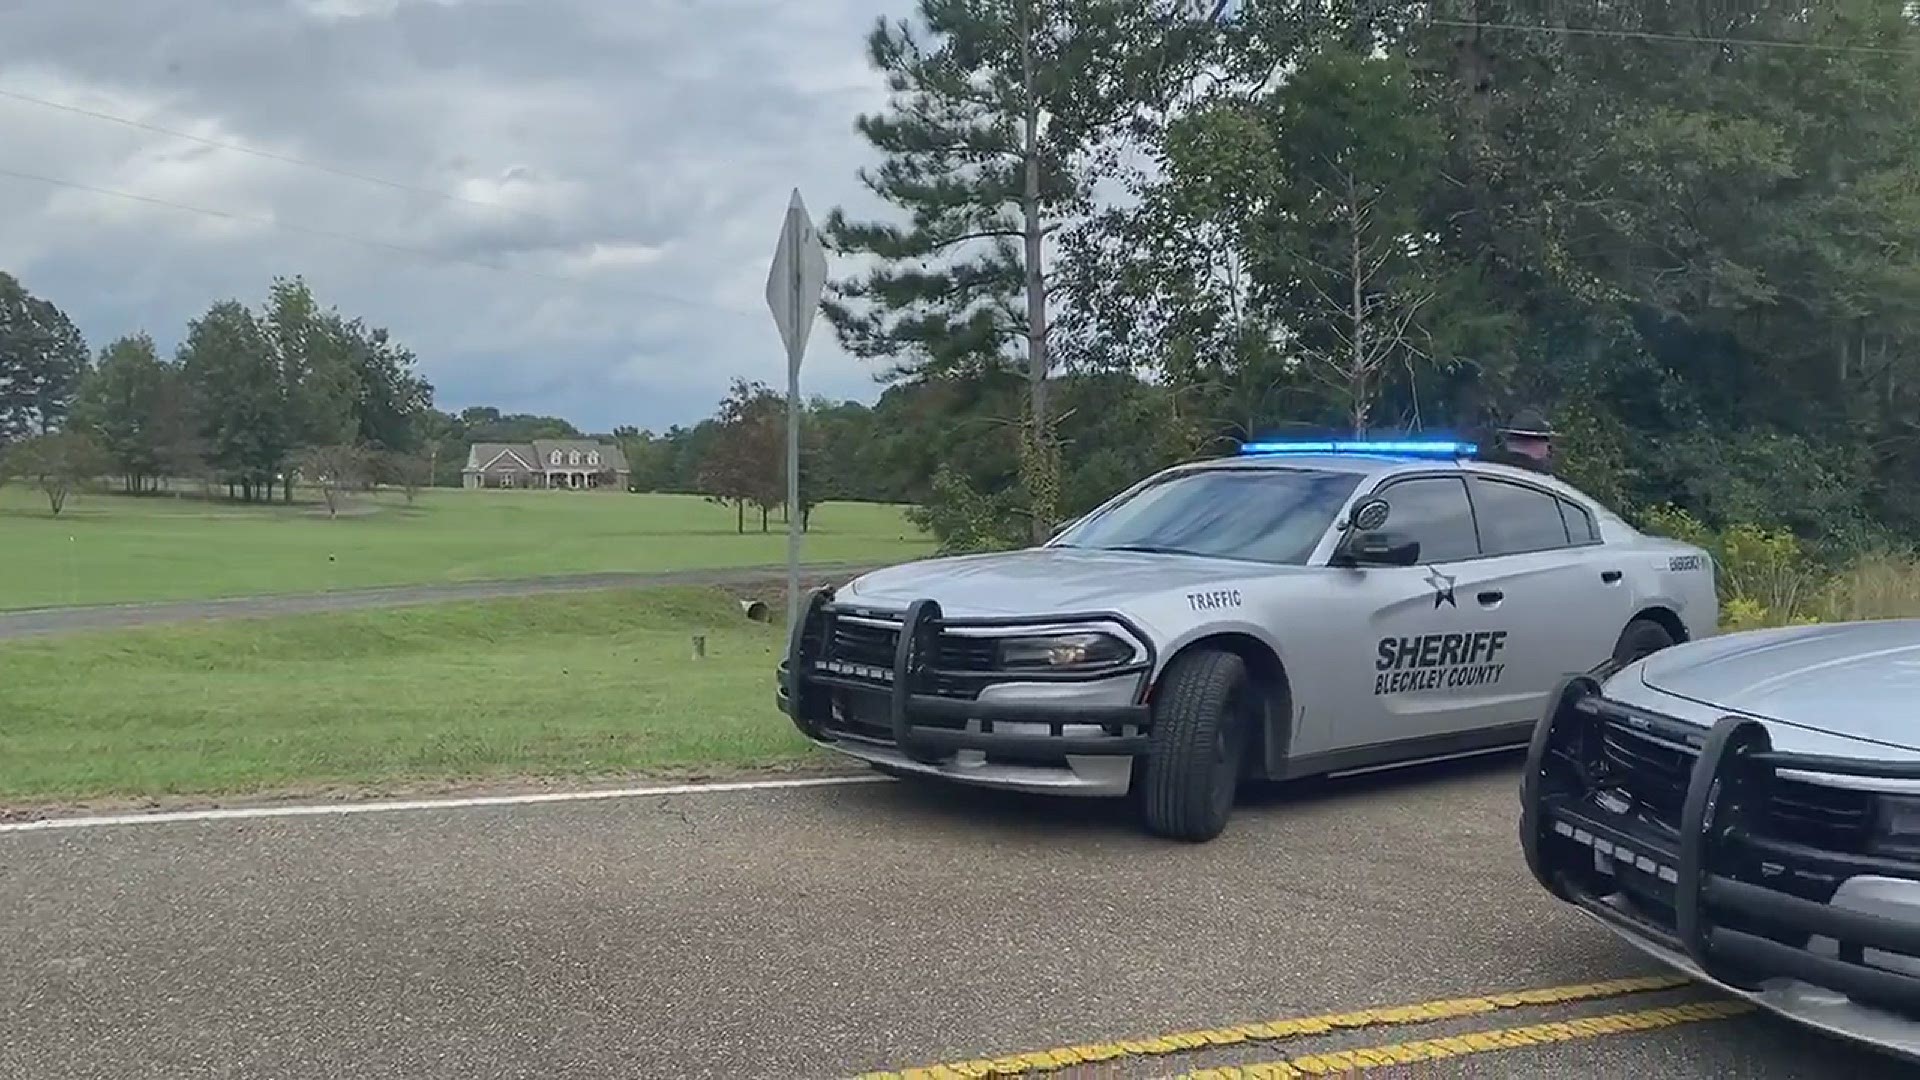 A woman's body was found on Brodhead Road in the northern part of Bleckley County on Sunday morning.